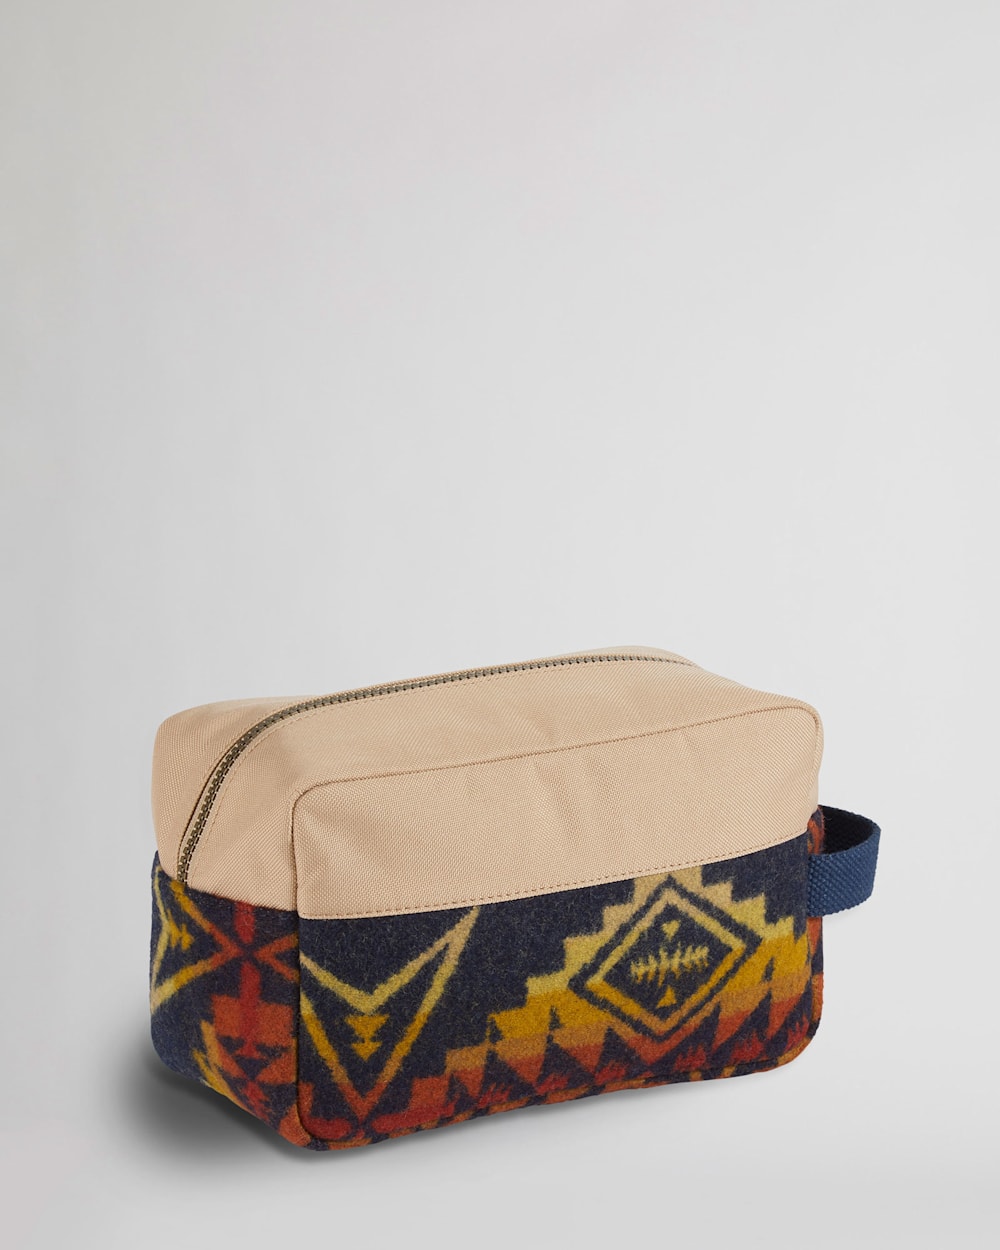 ALTERNATE VIEW OF PINTO MOUNTAINS CARRYALL POUCH IN NAVY/TAN MULTI image number 2